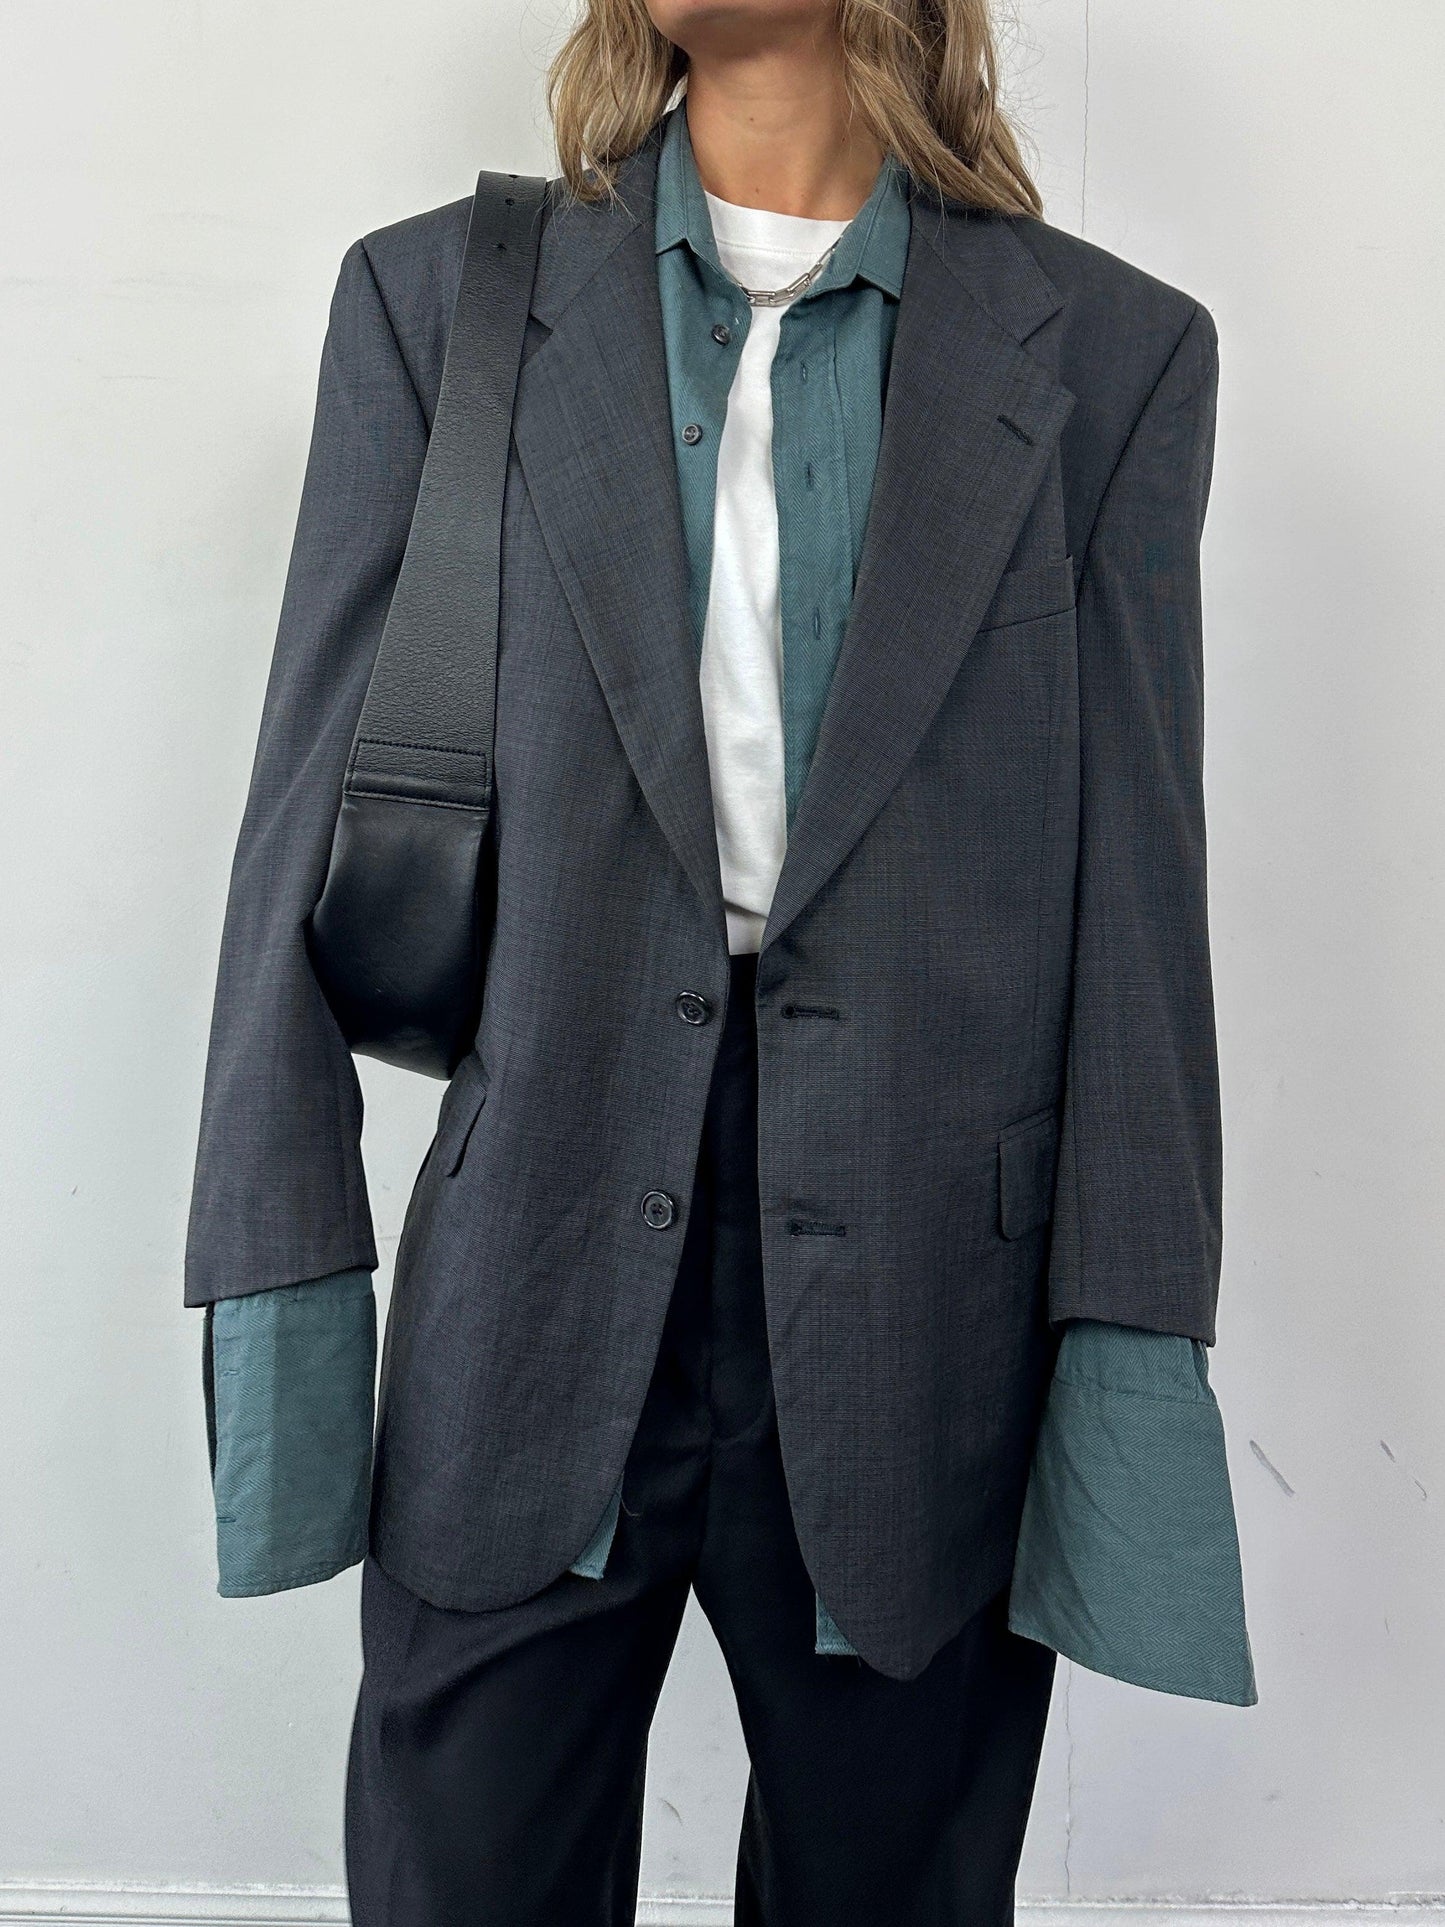 Christian Dior Pure Wool Single Breasted Blazer - M/L - Known Source